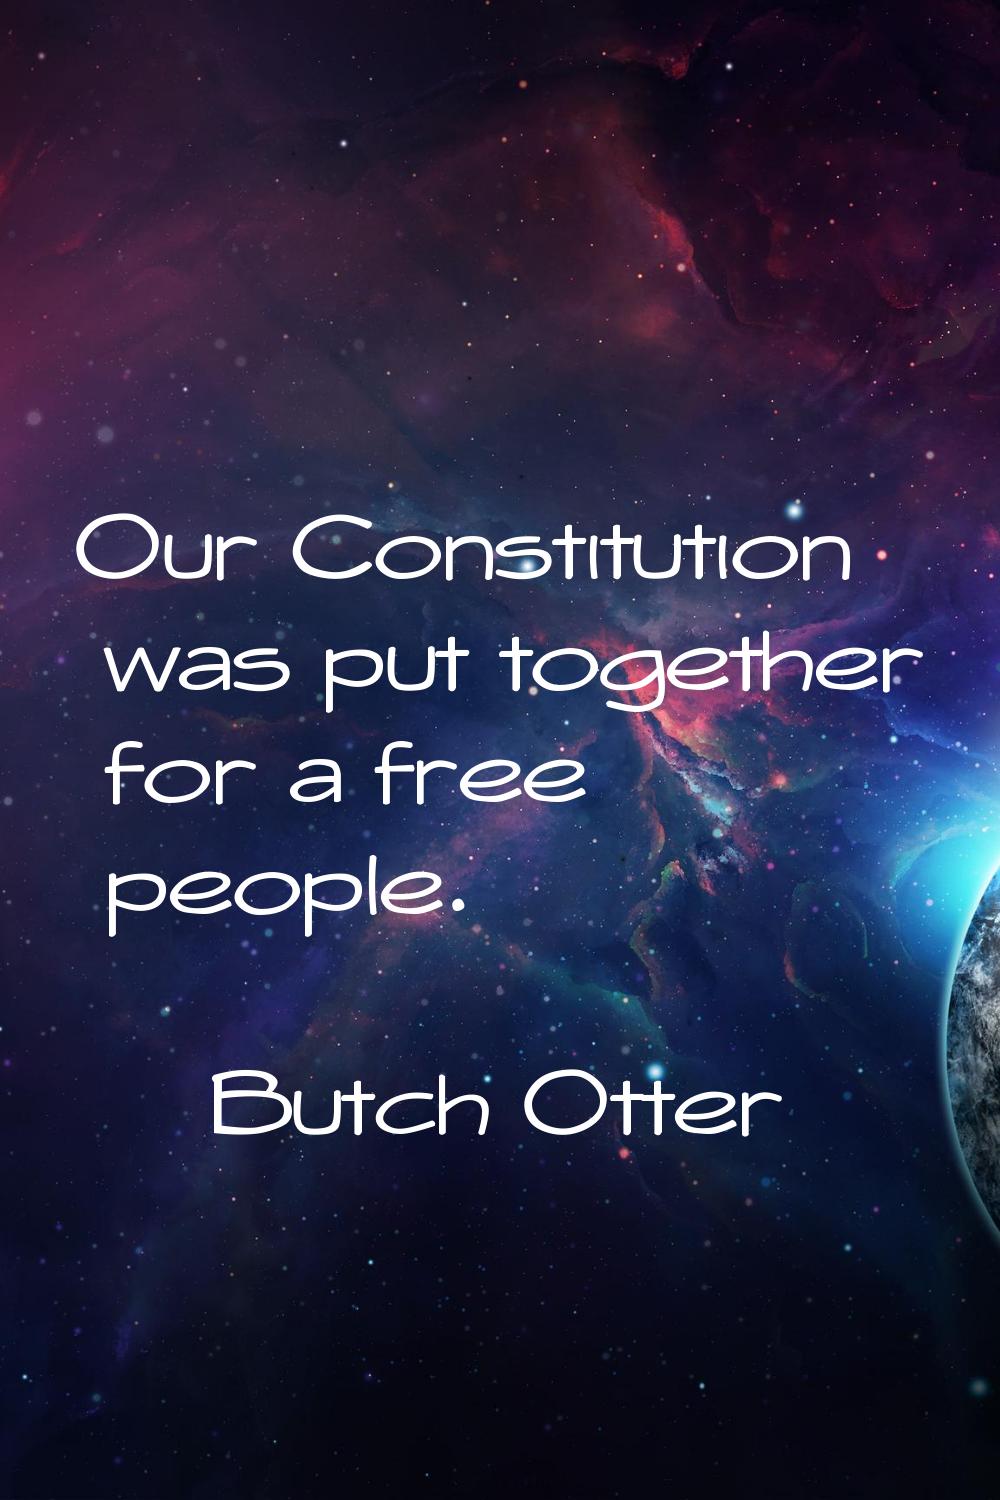 Our Constitution was put together for a free people.